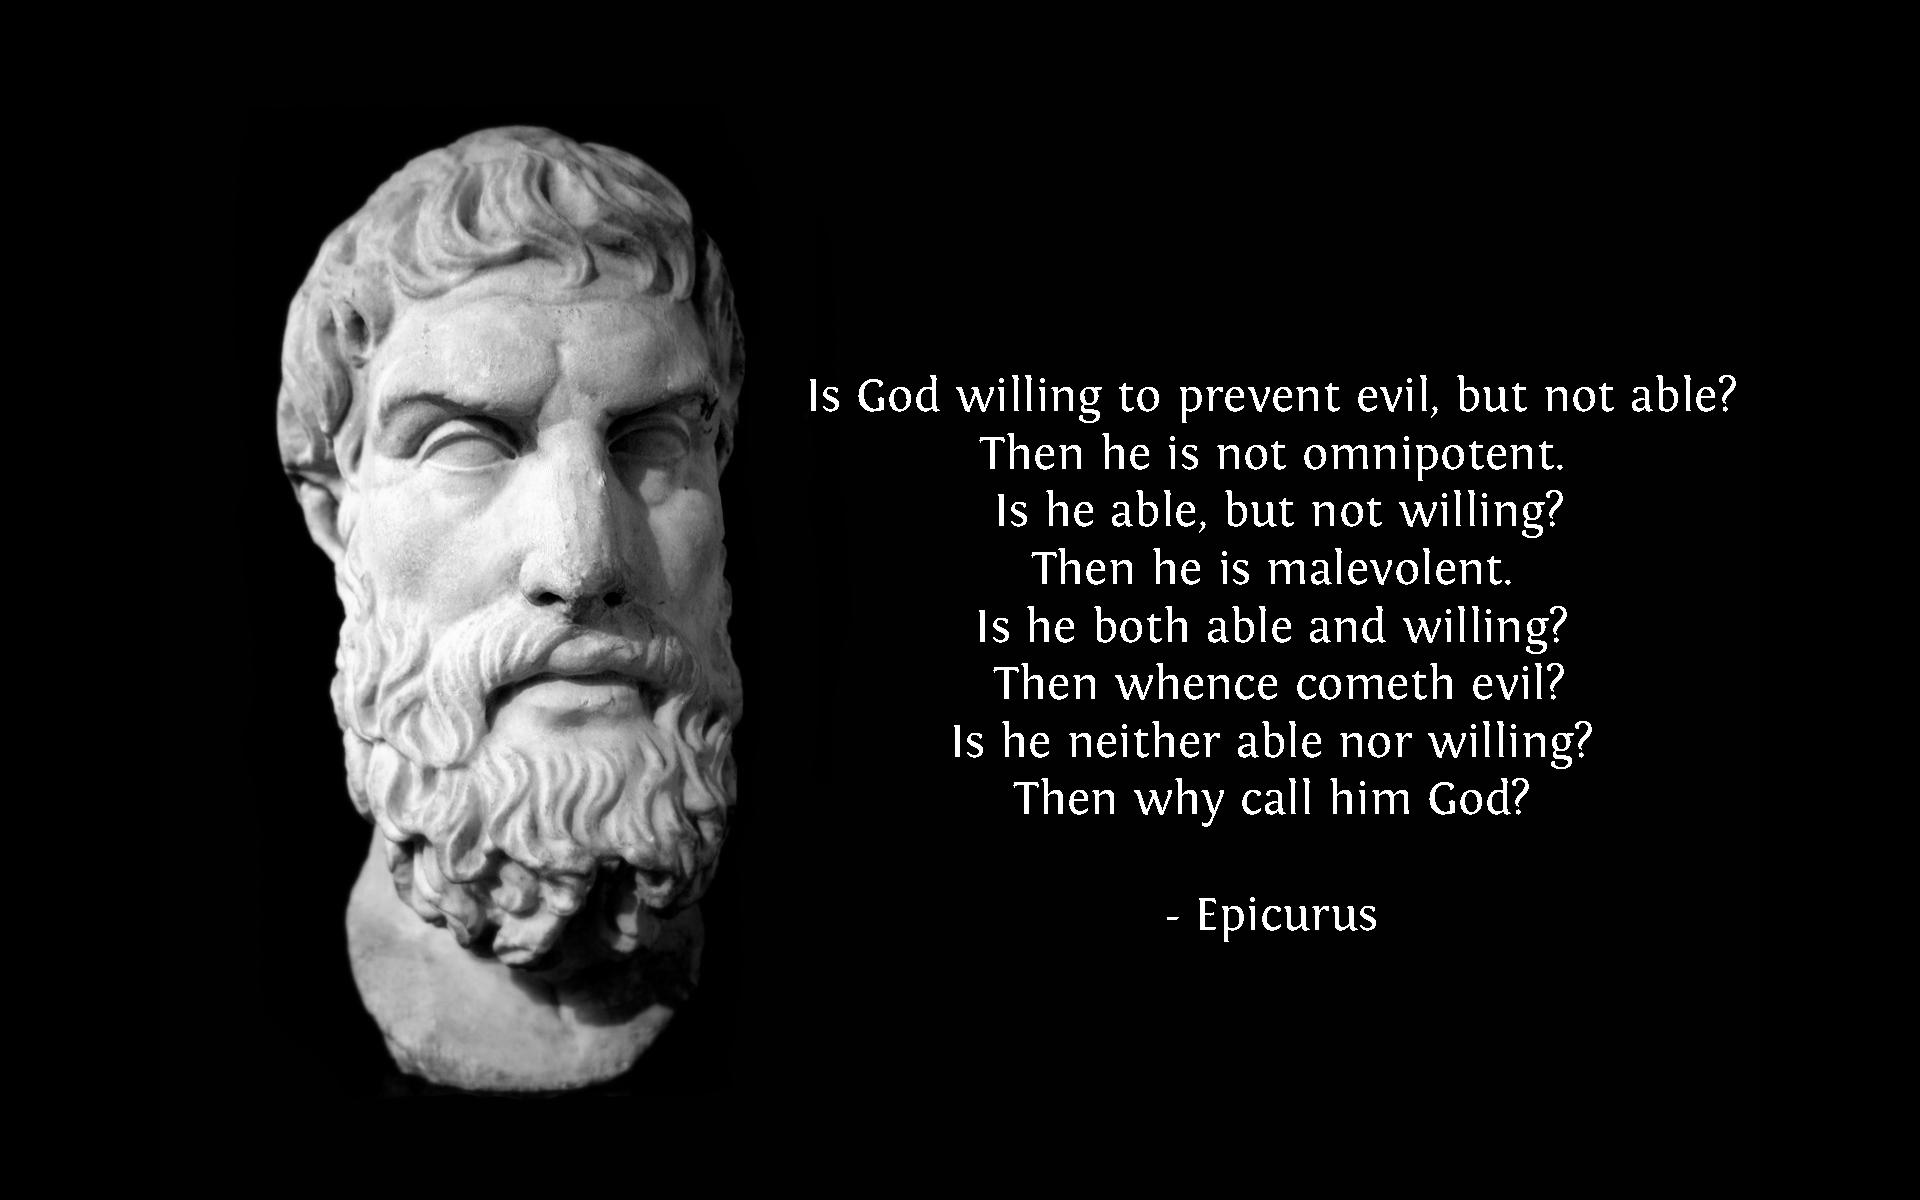 Is God willing to prevent evil,but not able1Then he is not omnipotent.Is he able, but not willing1Then he is malevolent. Is he both able and willing1 Then whence cometh evil1 Is he..... Epicurus